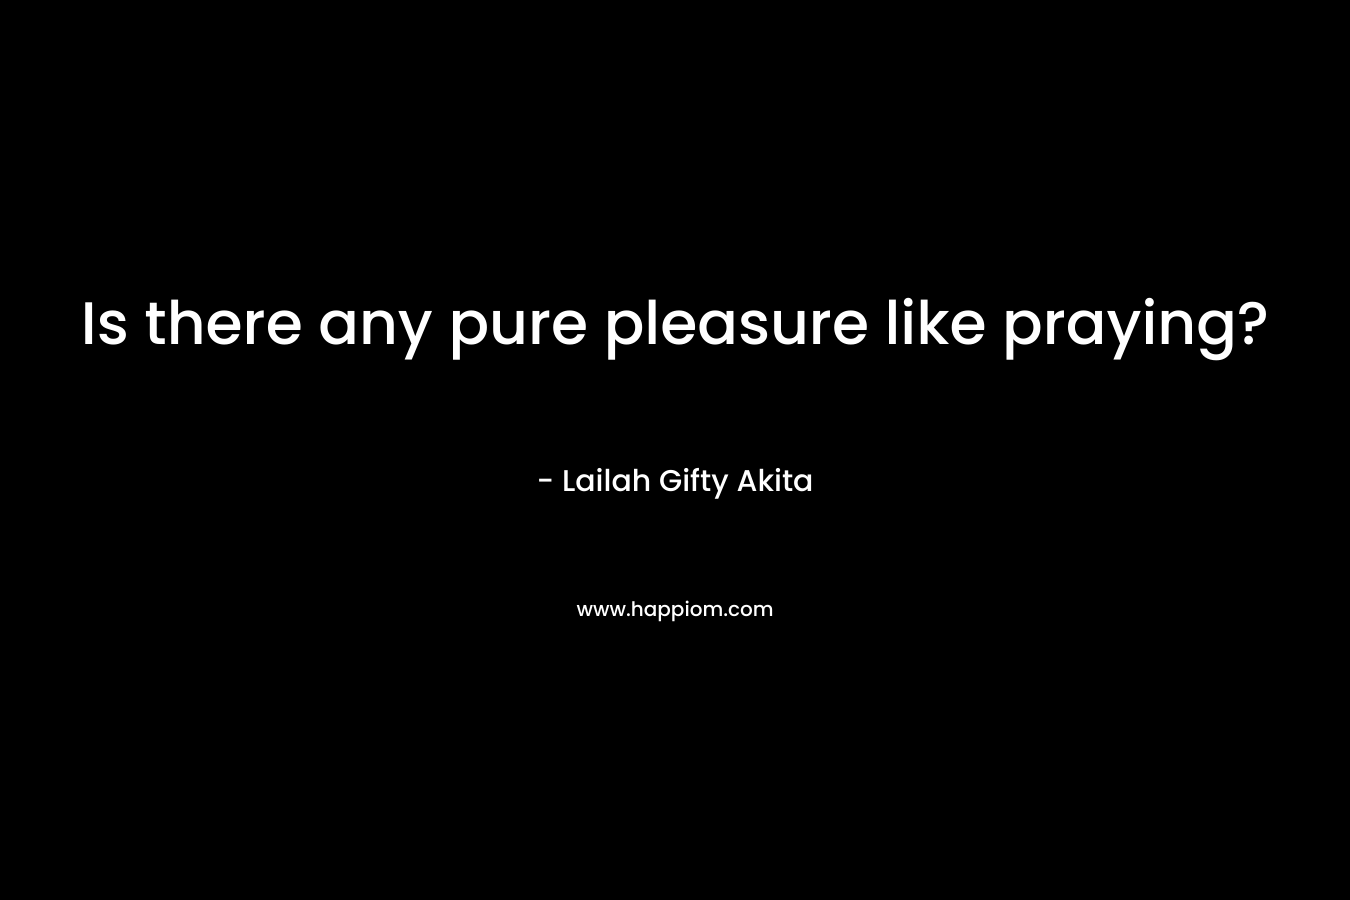 Is there any pure pleasure like praying?